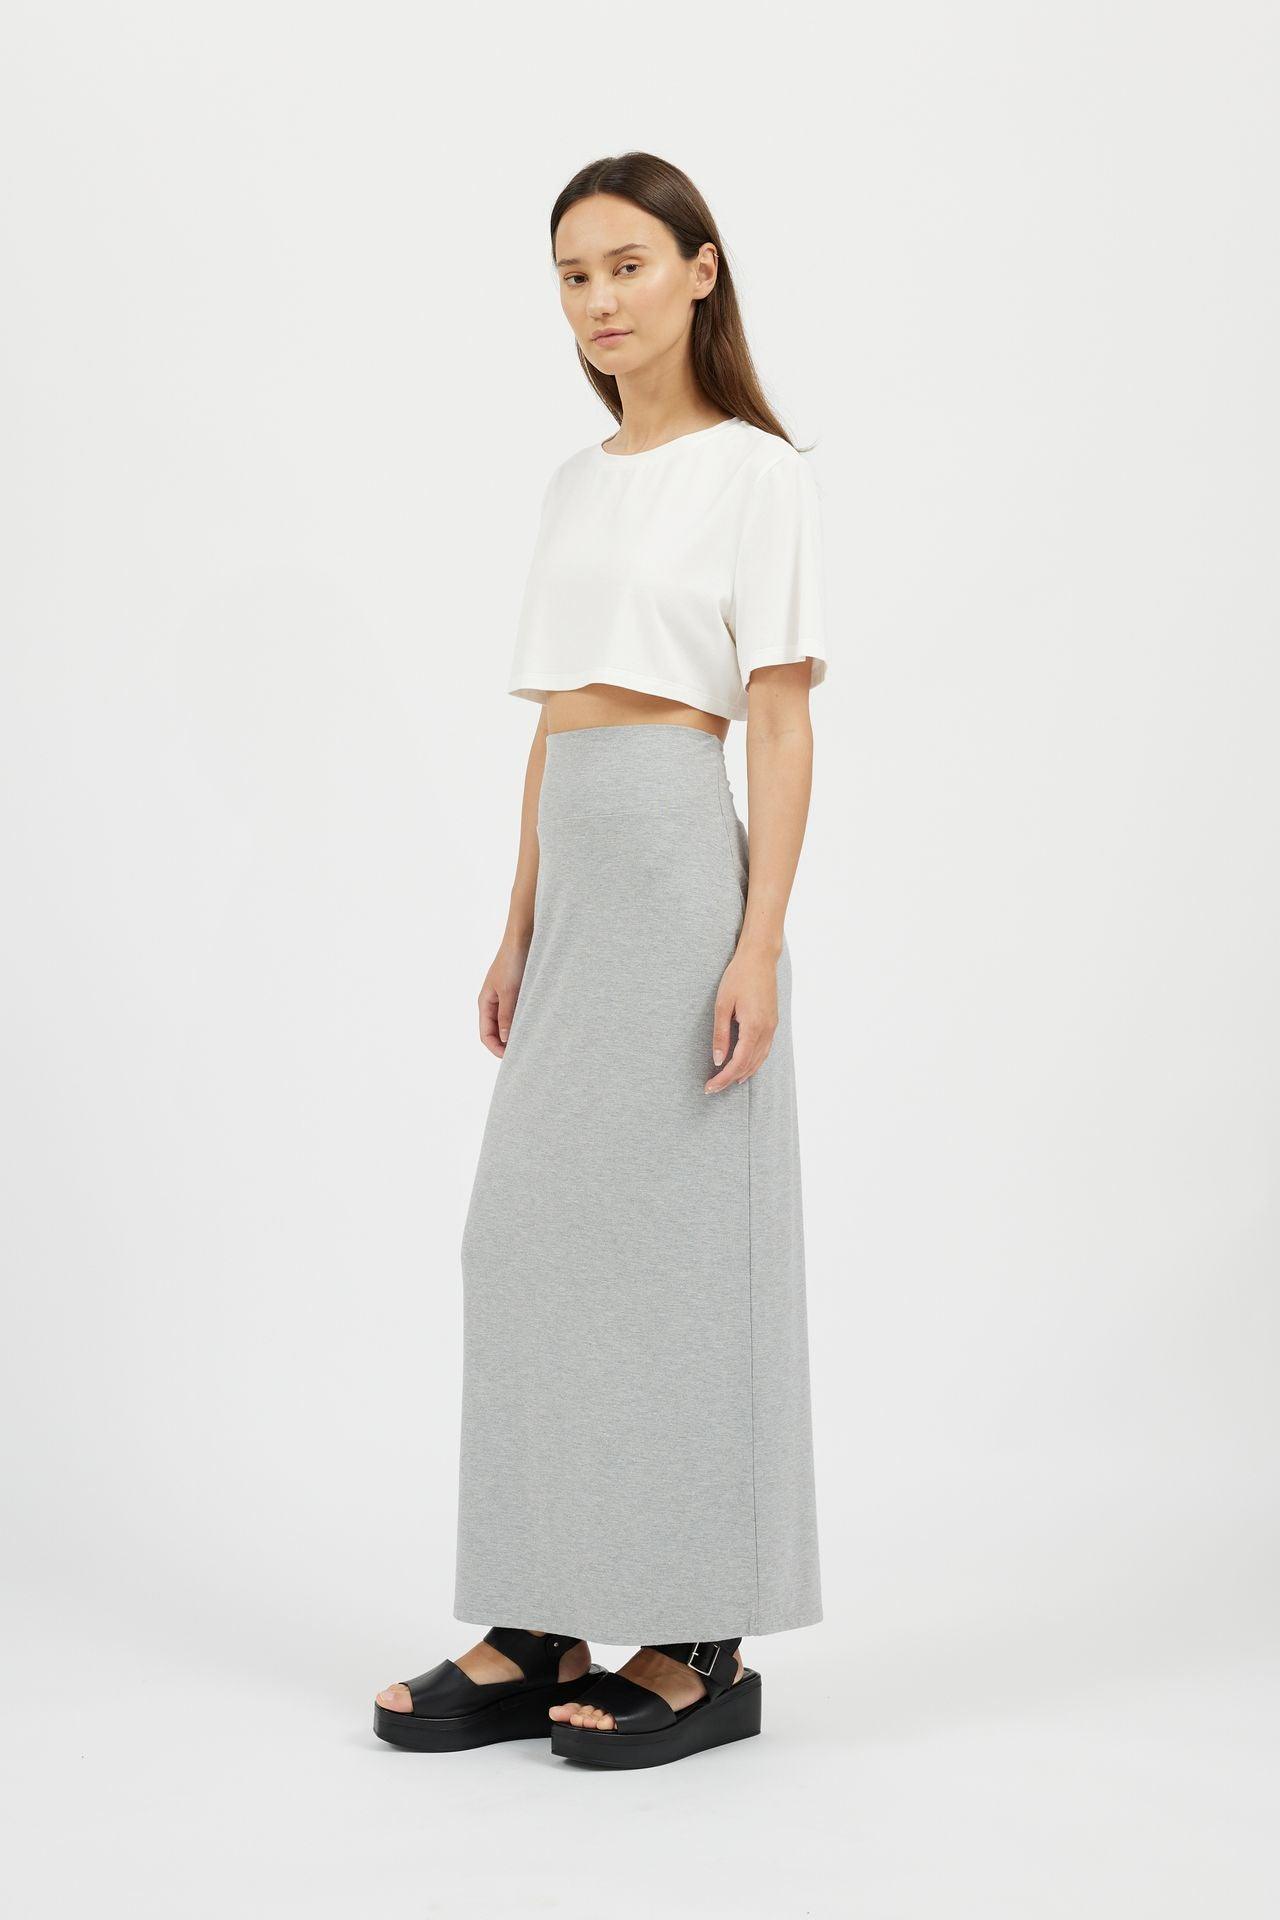 High Waisted | | Not Pencil Skirt Skirts Labeled